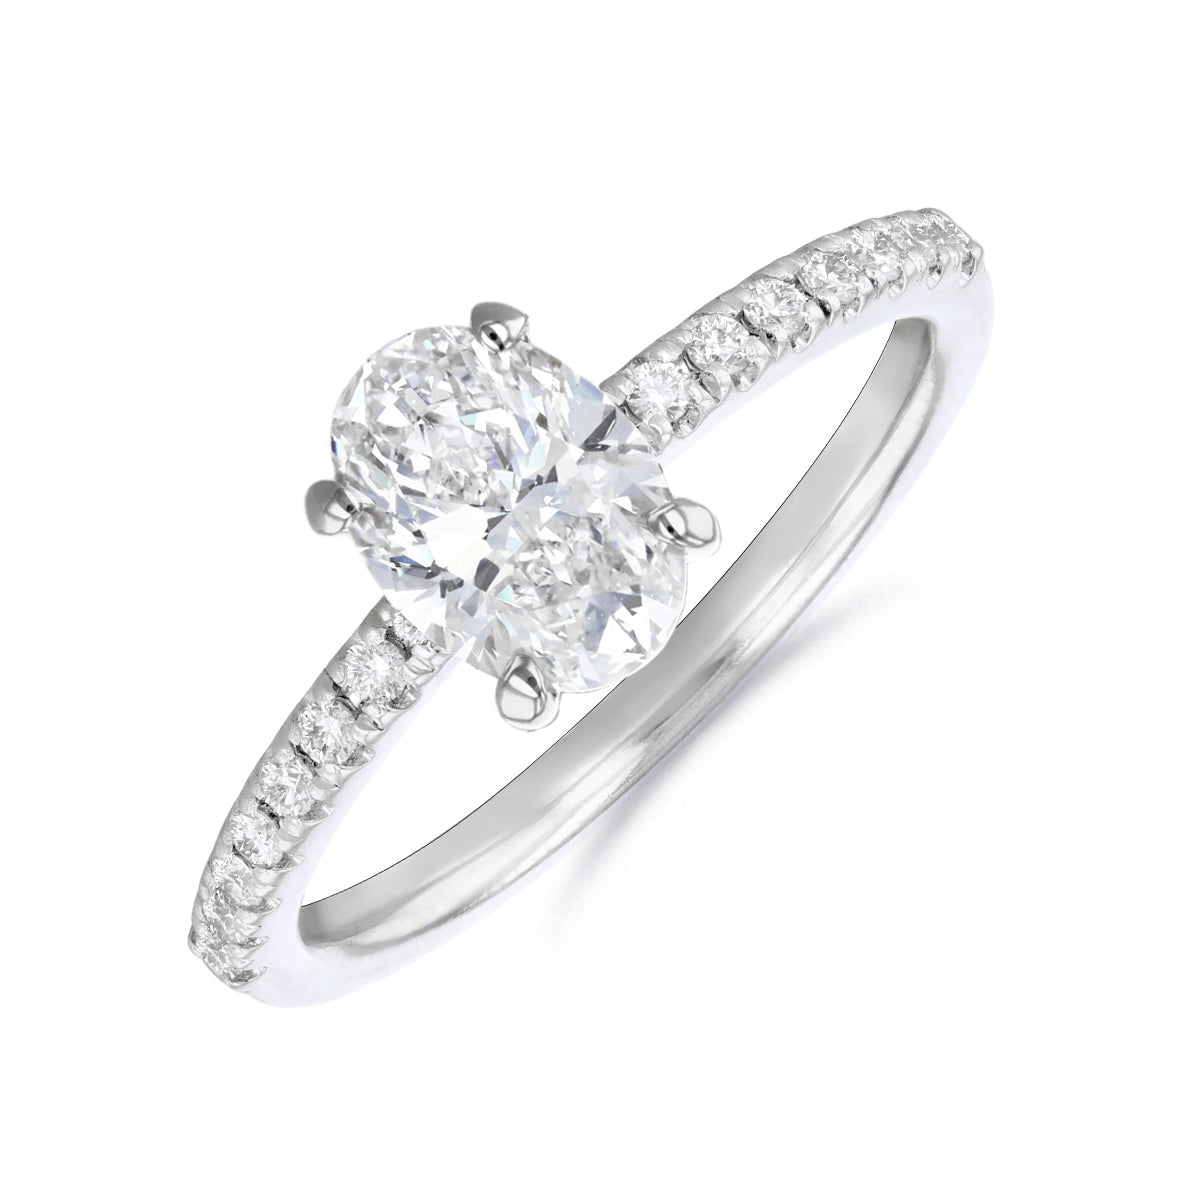 2.00ct Poppy Shoulder Set Oval Cut Diamond Solitaire Engagement Ring | 18ct Yellow Gold